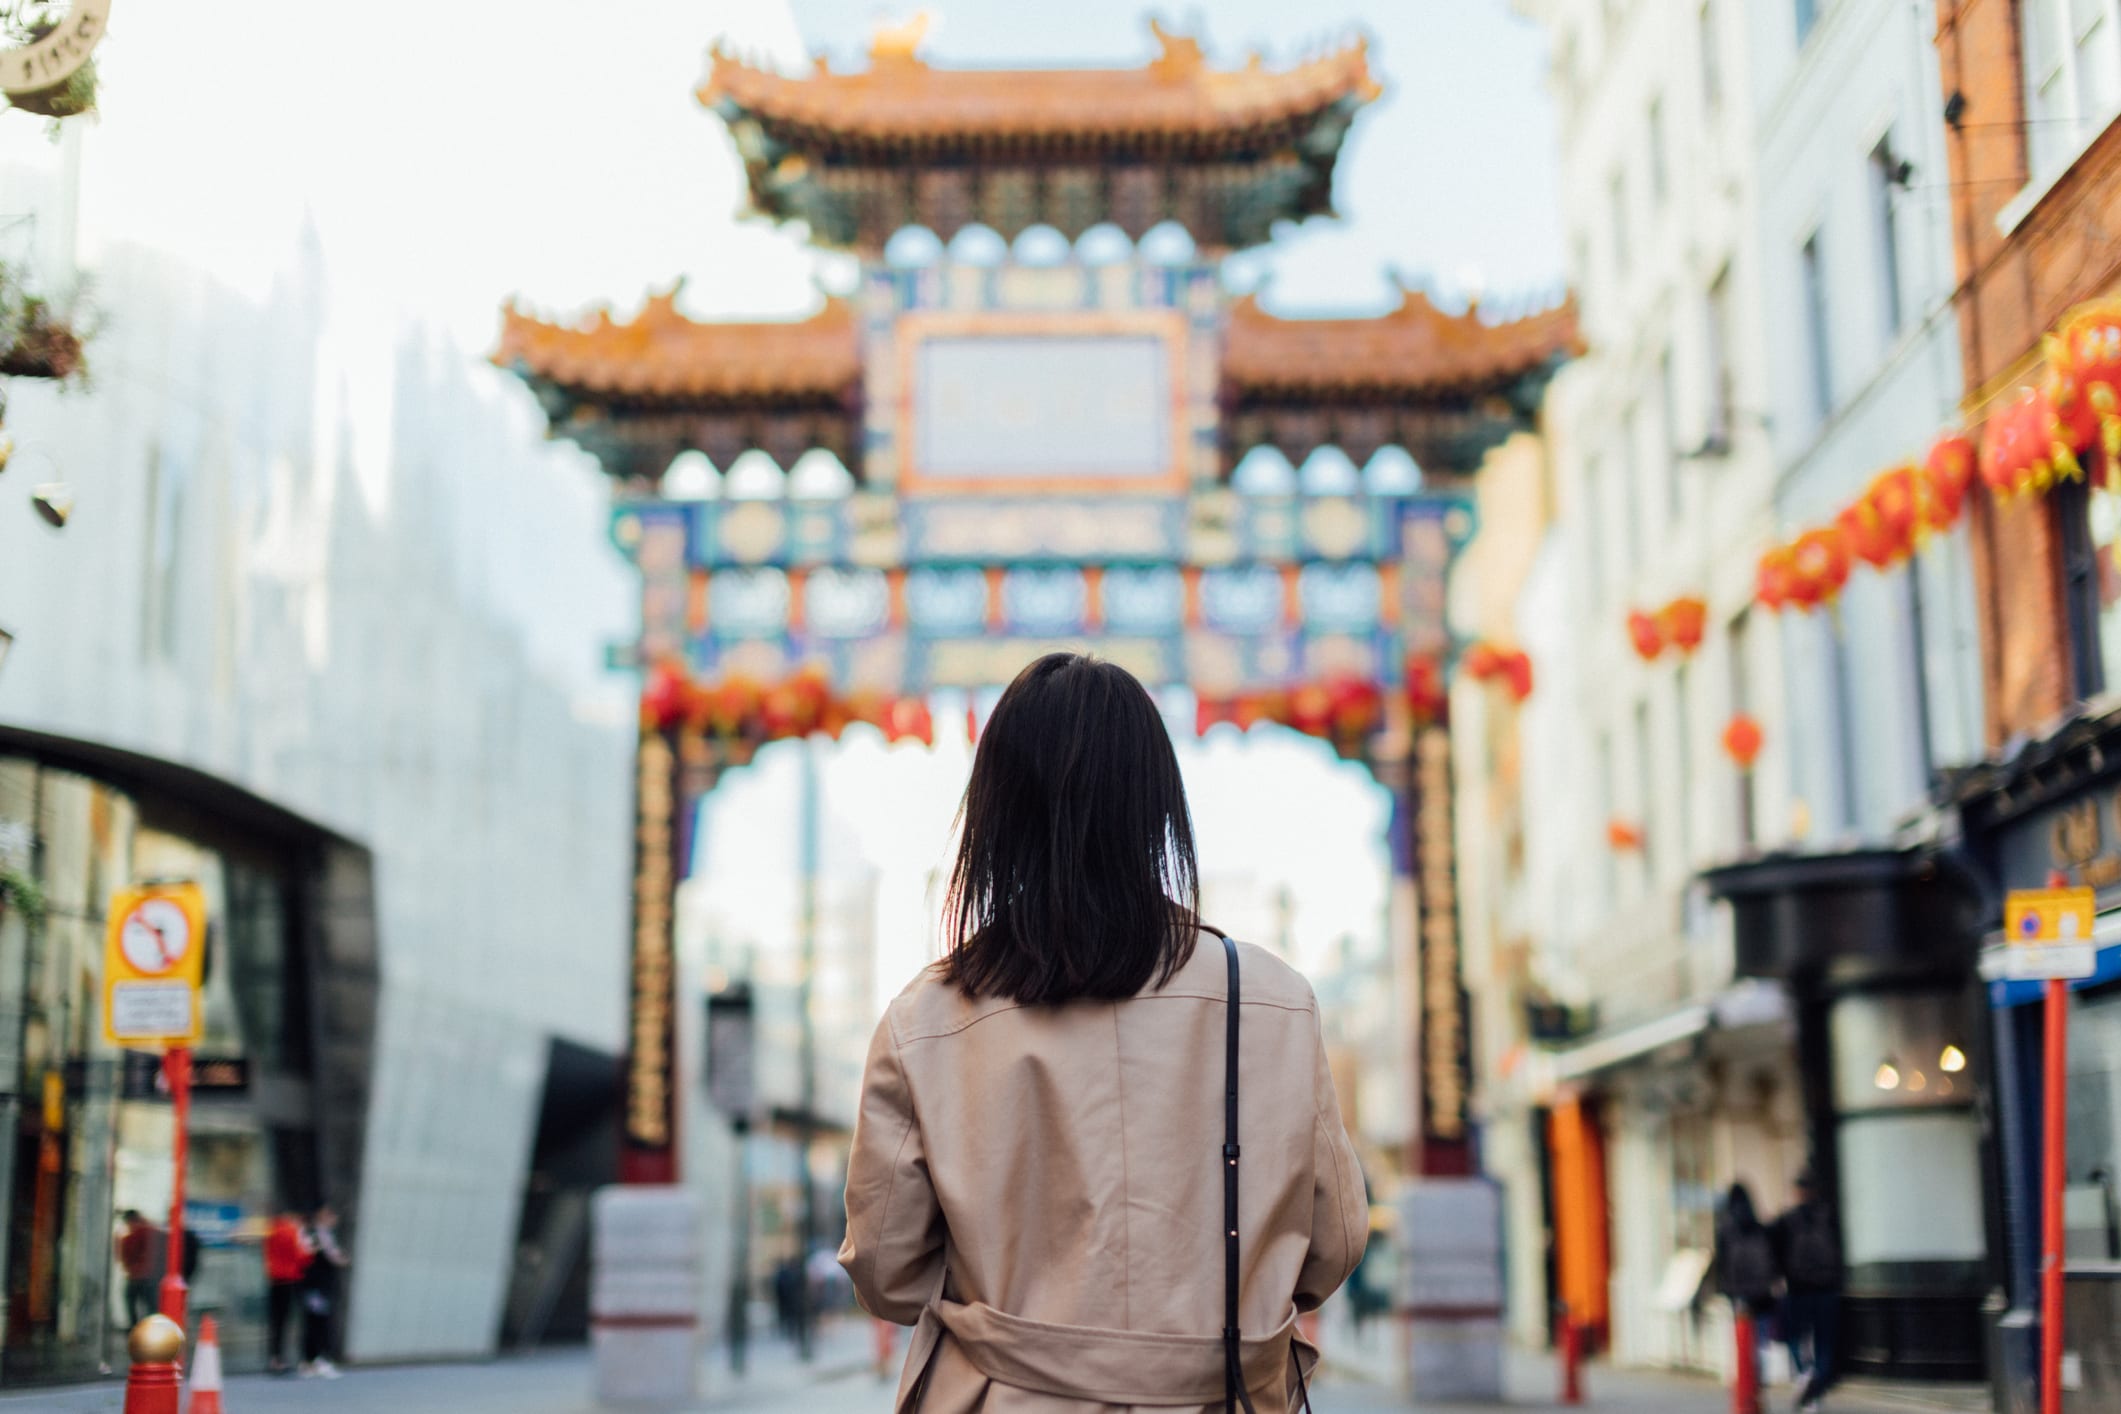 Rear view of a female tourist walking on the street at Chinatown, facing a traditional Chinese style pavilion in Chinatown, London - with red coloured lantern hanging in the sky.